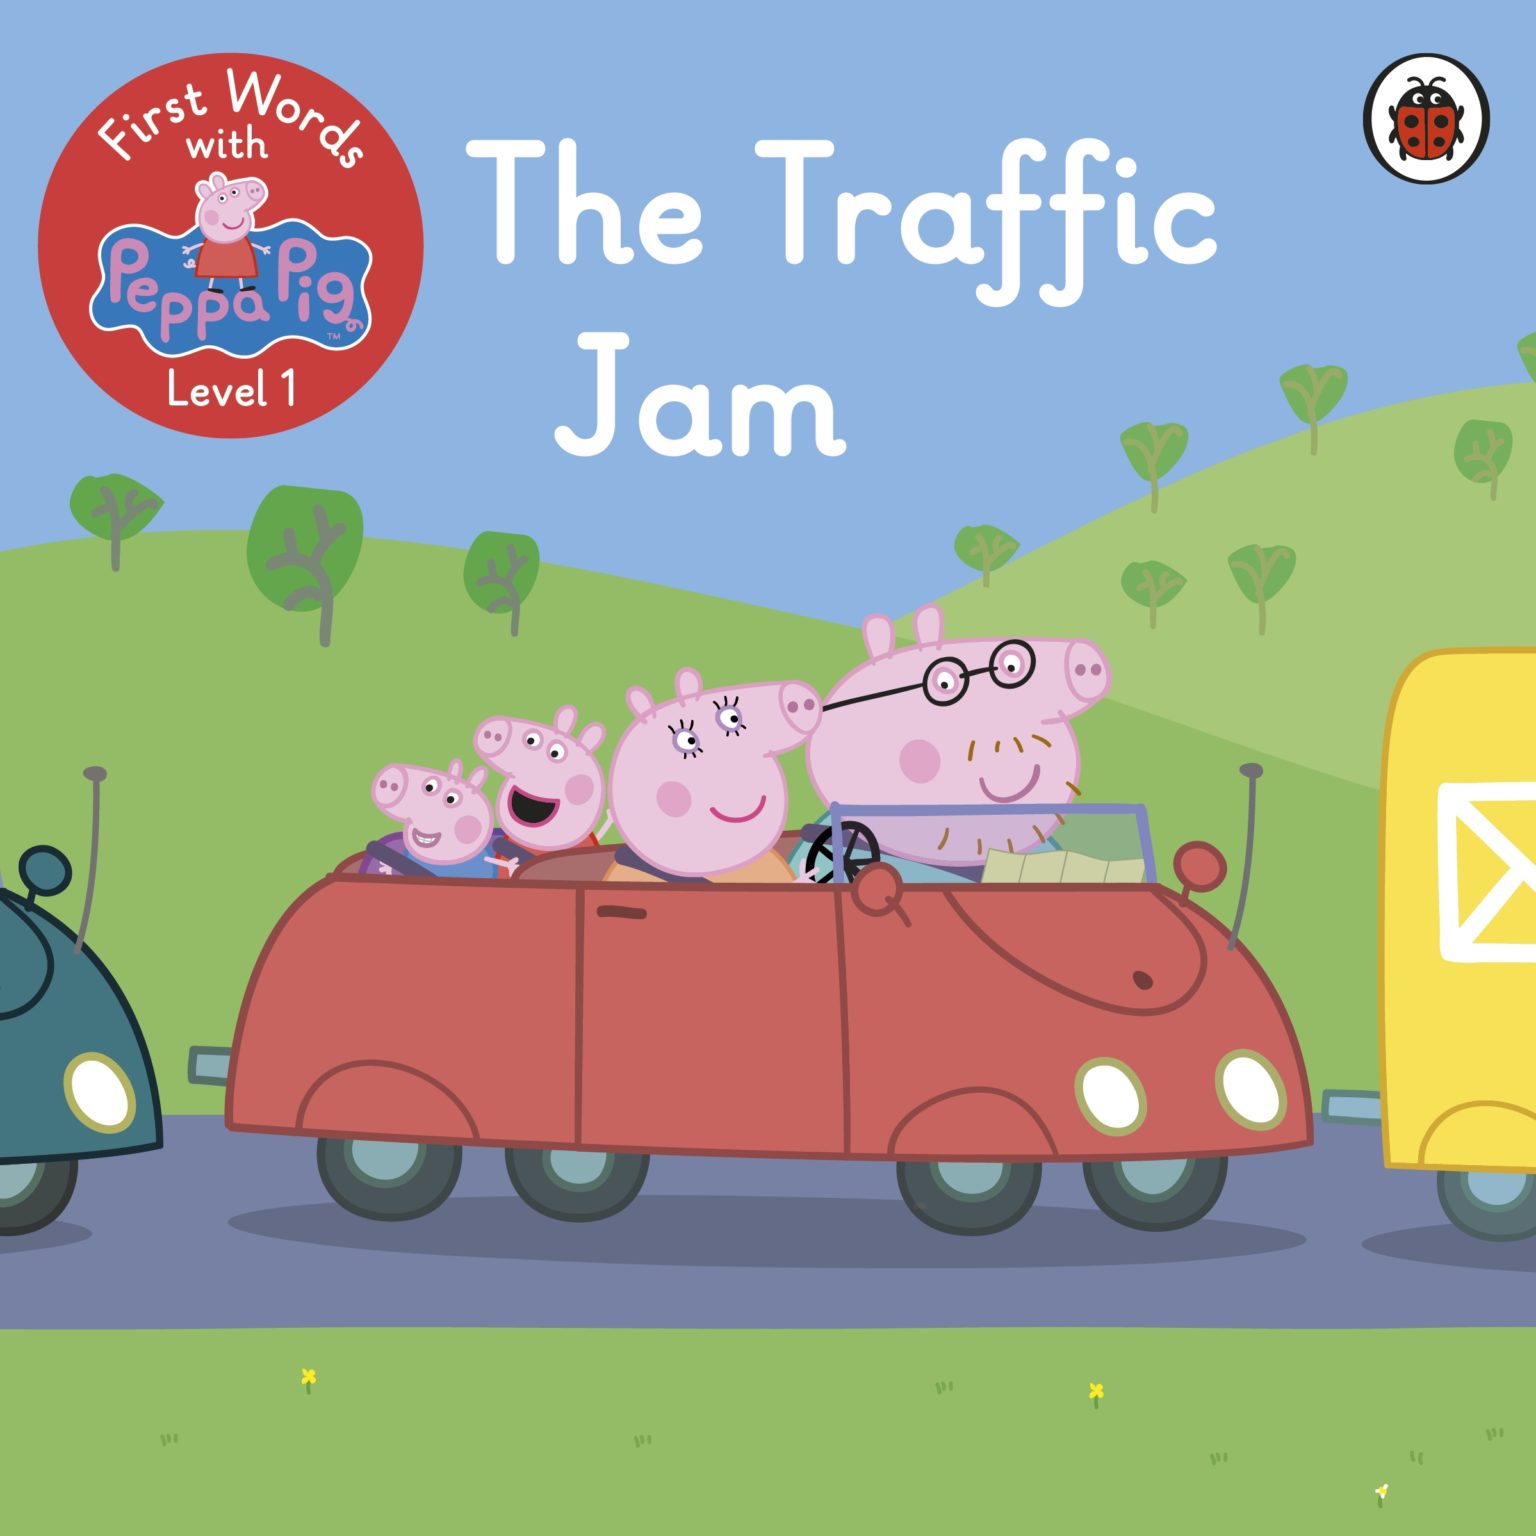 First Words with Peppa Pig: Level 1 The Traffic Jam